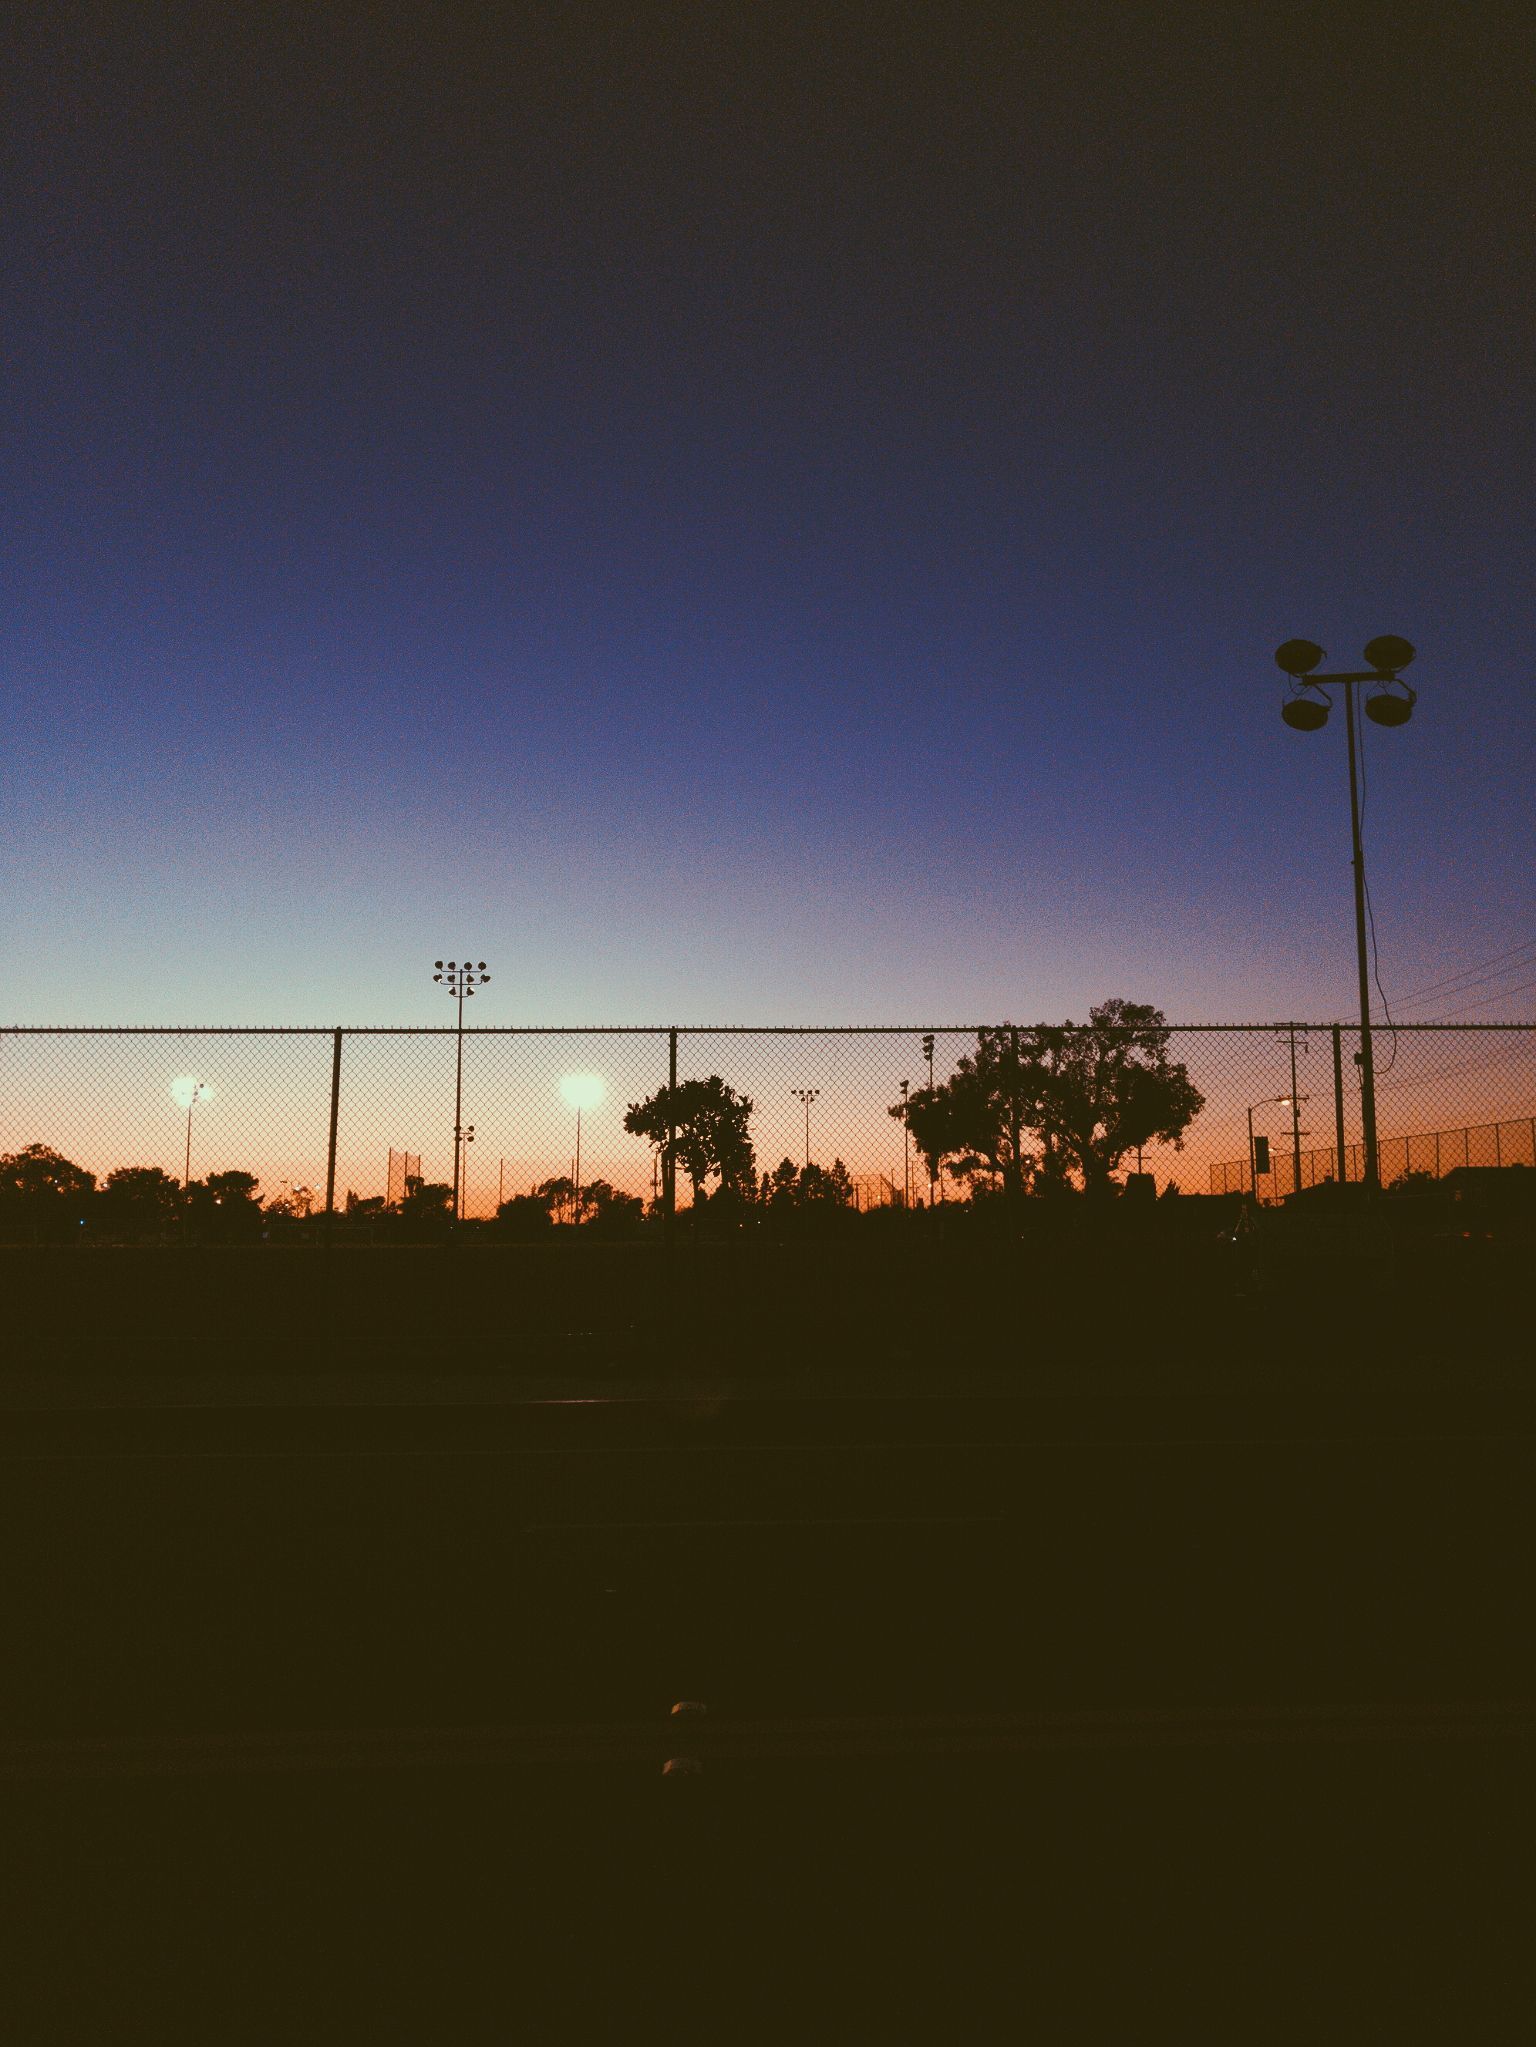 A sunset behind a fence and some trees. - Soccer